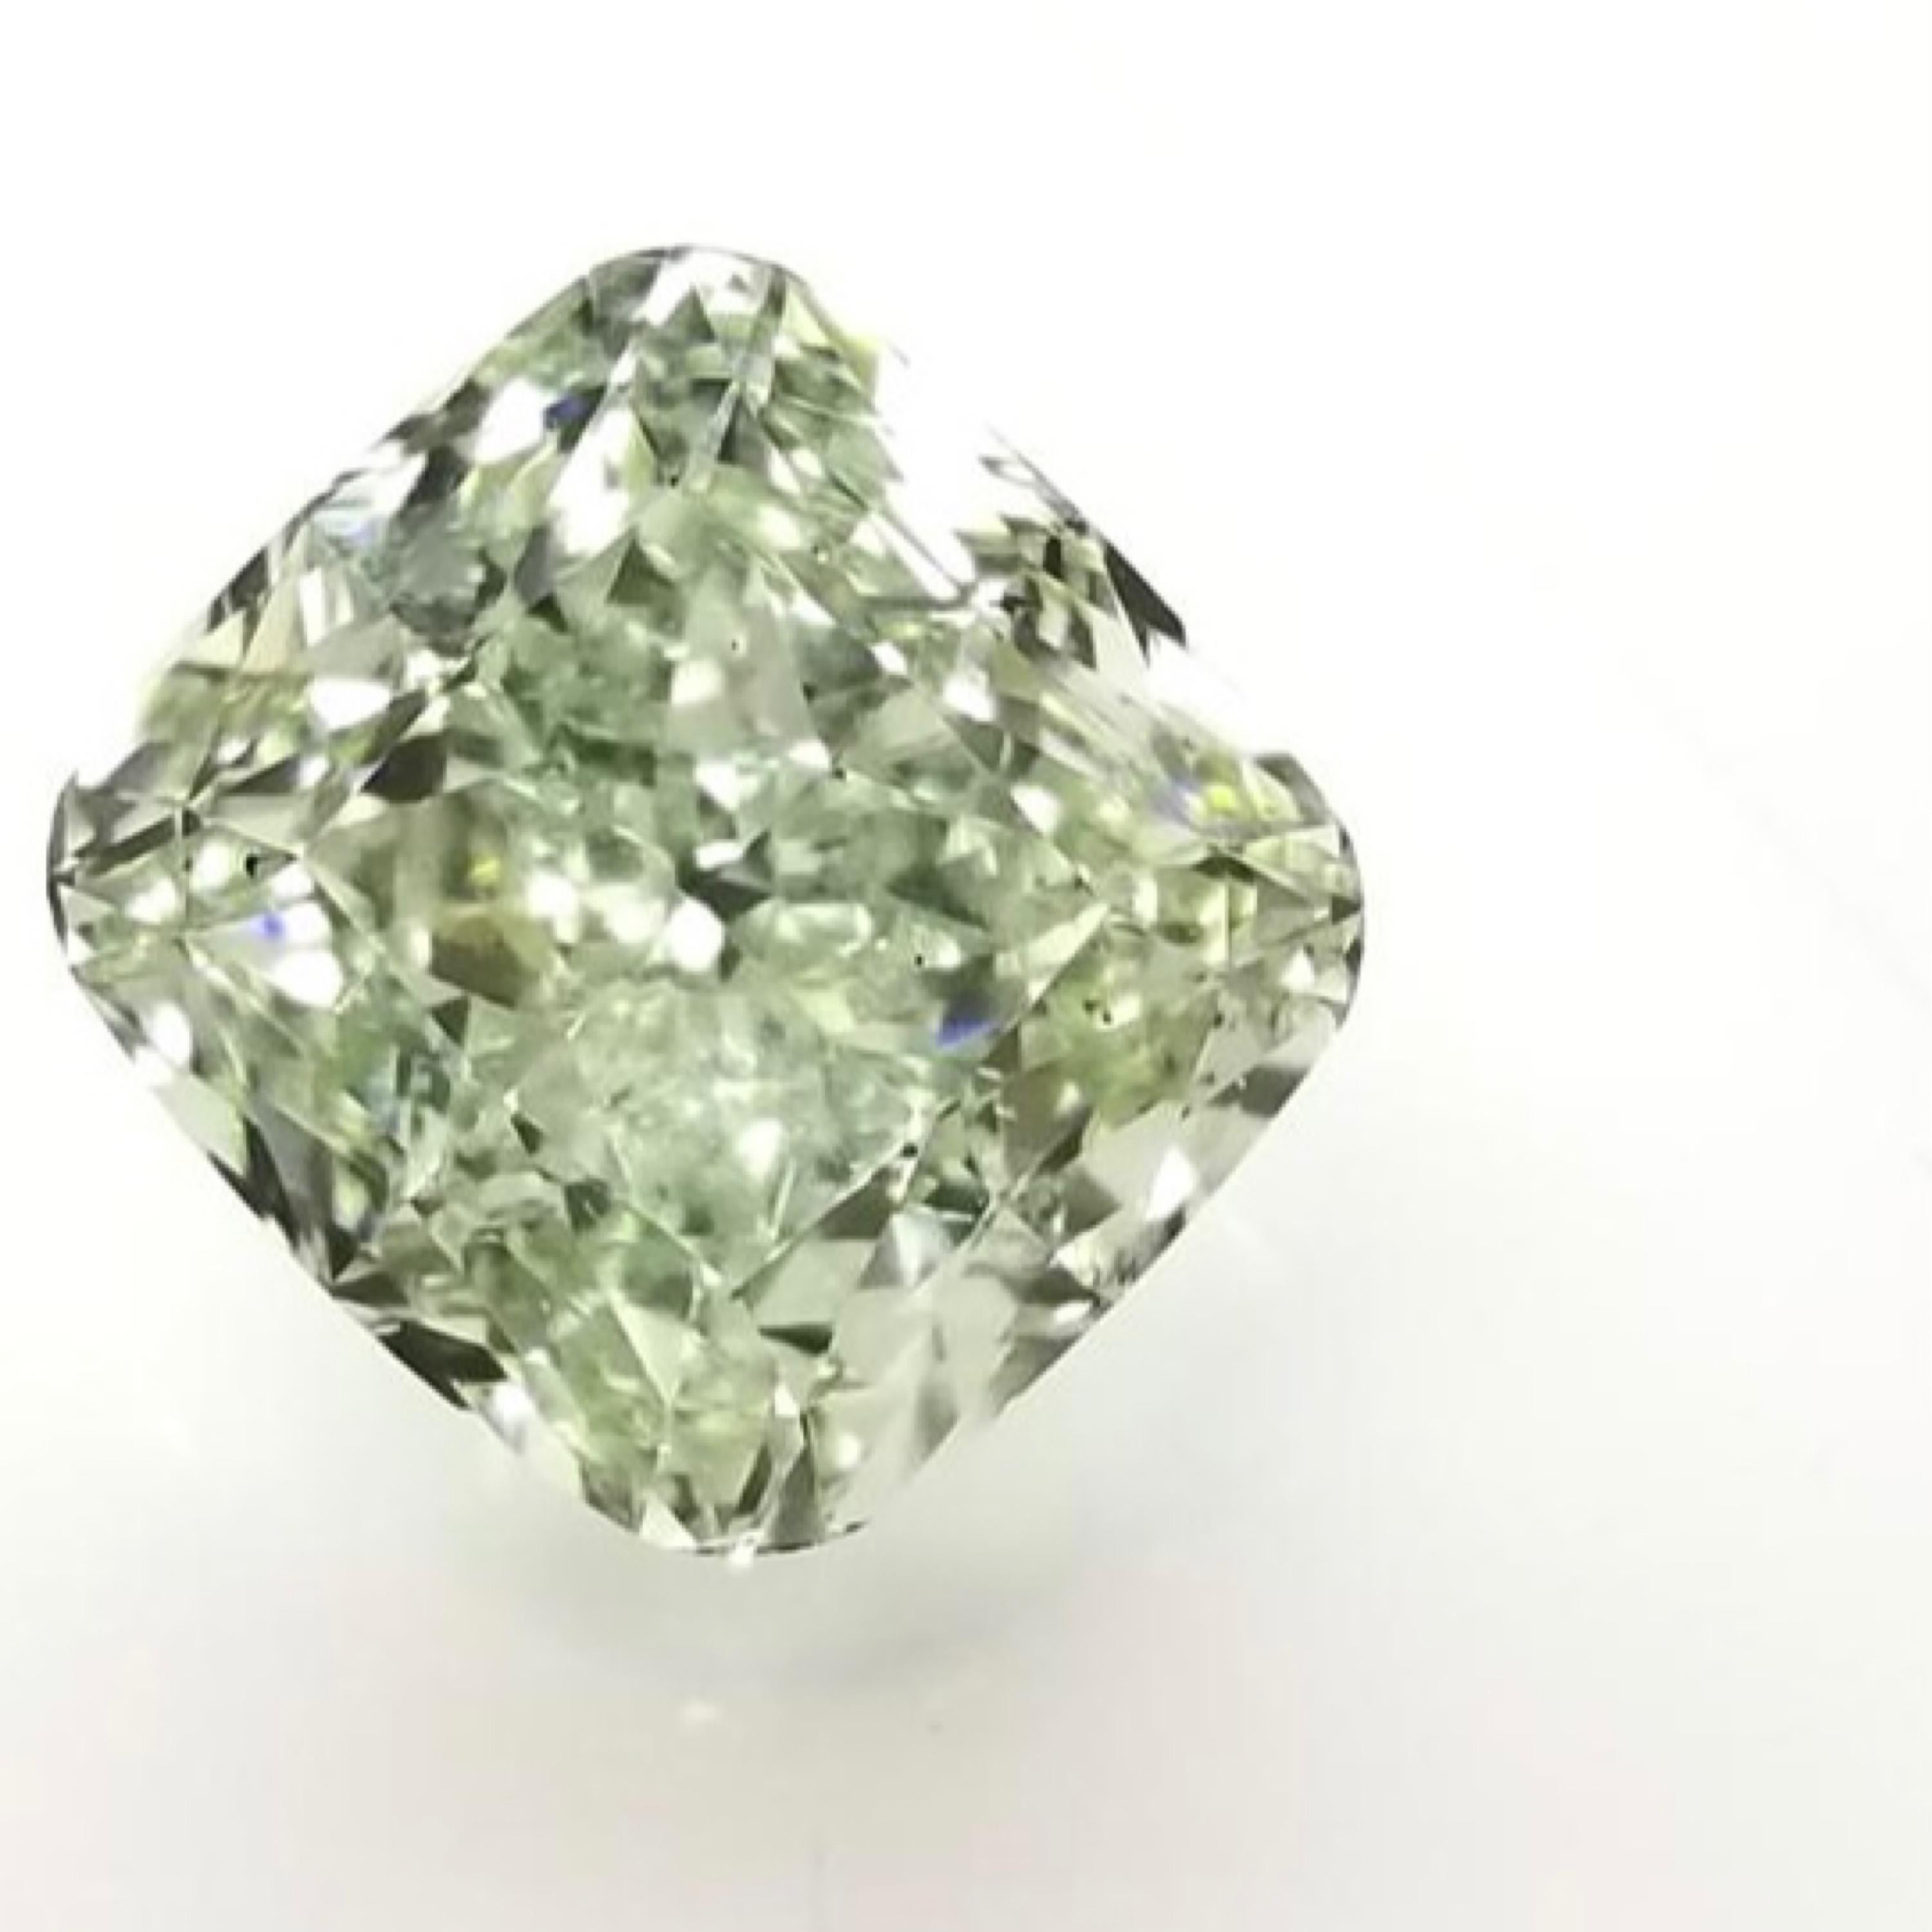 From the Emilio Jewelry Museum Vault, Showcasing a magnificent investment grade 5.00 carat Gia certified natural fancy yellowish green diamond. Yellowish Green is rarer than yellow green being that the diamond only has an overtone of about 10%